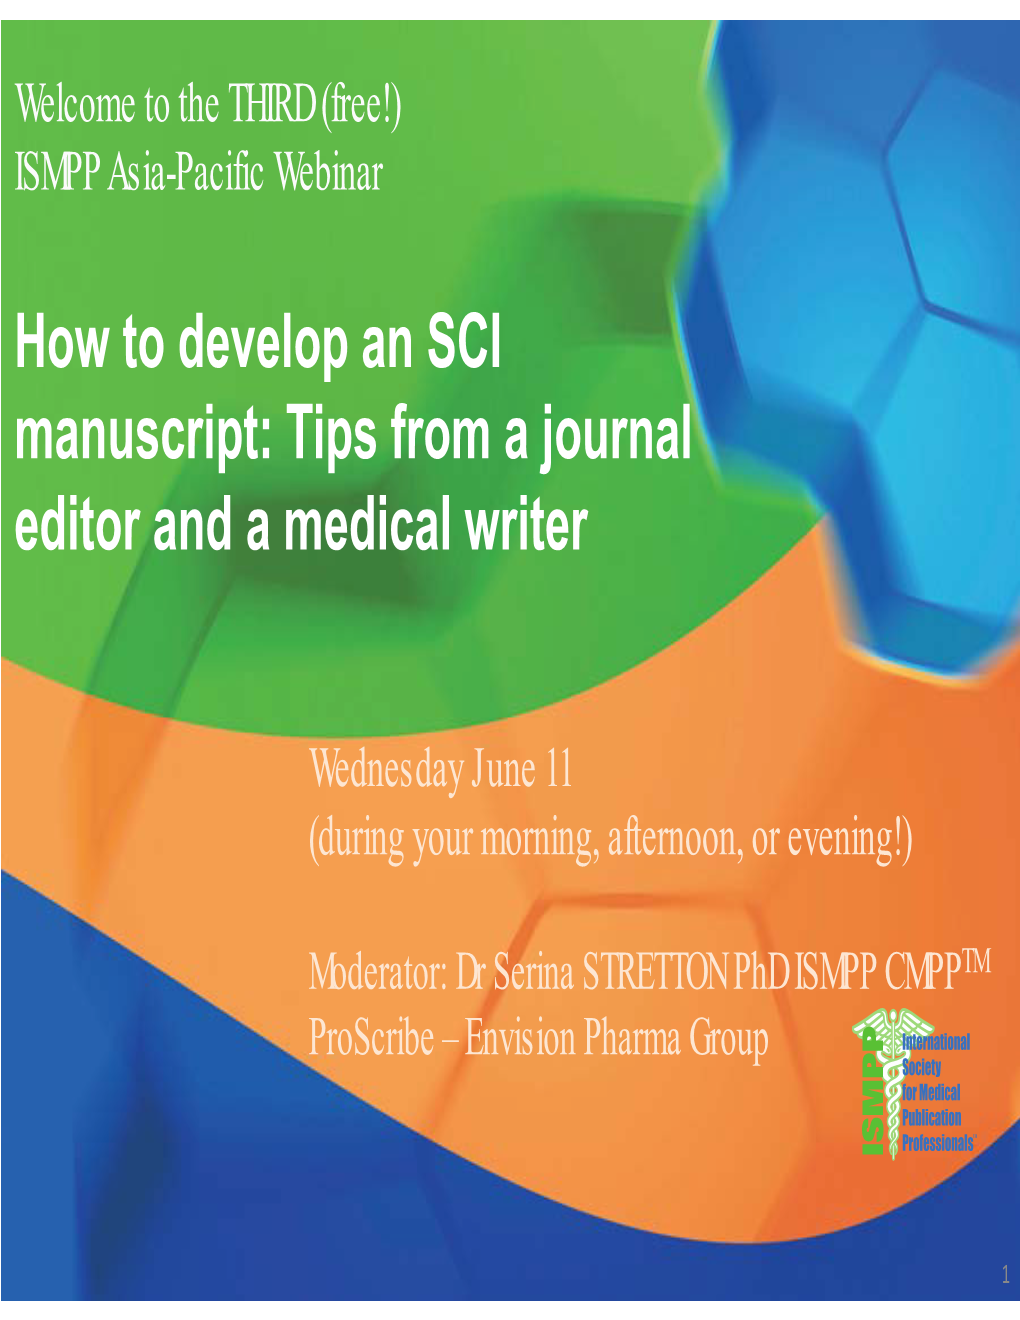 How to Develop an SCI Manuscript: Tips from a Journal Editor and a Medical Writer